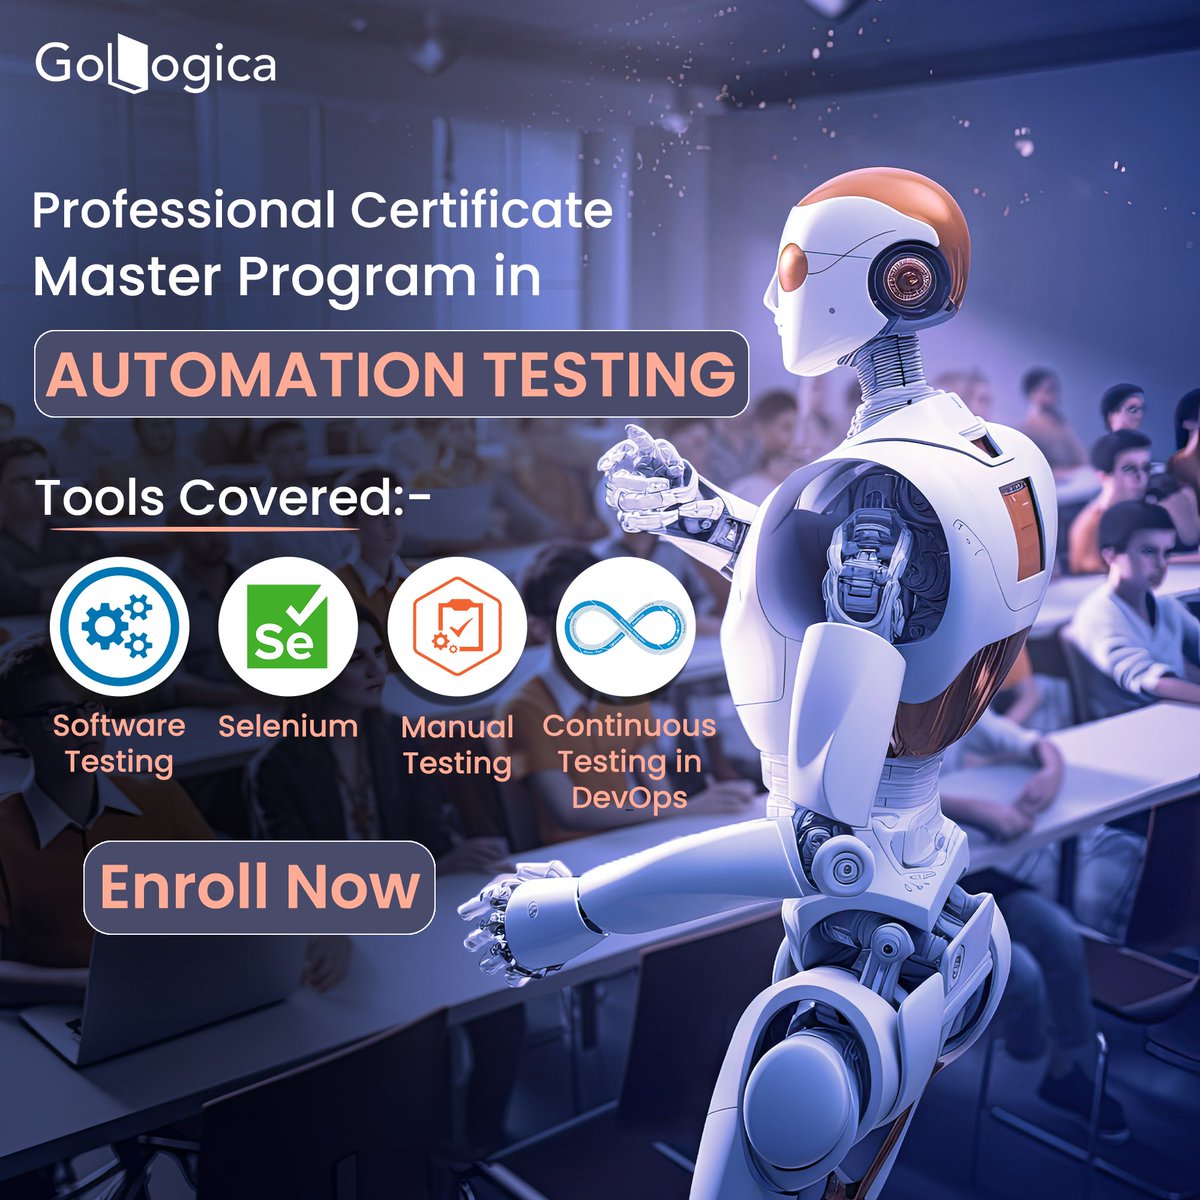 🌟 Advance Your Career with GoLogica on Automation Testing Masters Program! 🌟

🔗 Join Us Today and take the first step towards a successful career in Automation Testing! 🔗

For More Details: gologica.com

#GoLogica #testing #testingengineers #automation #developers